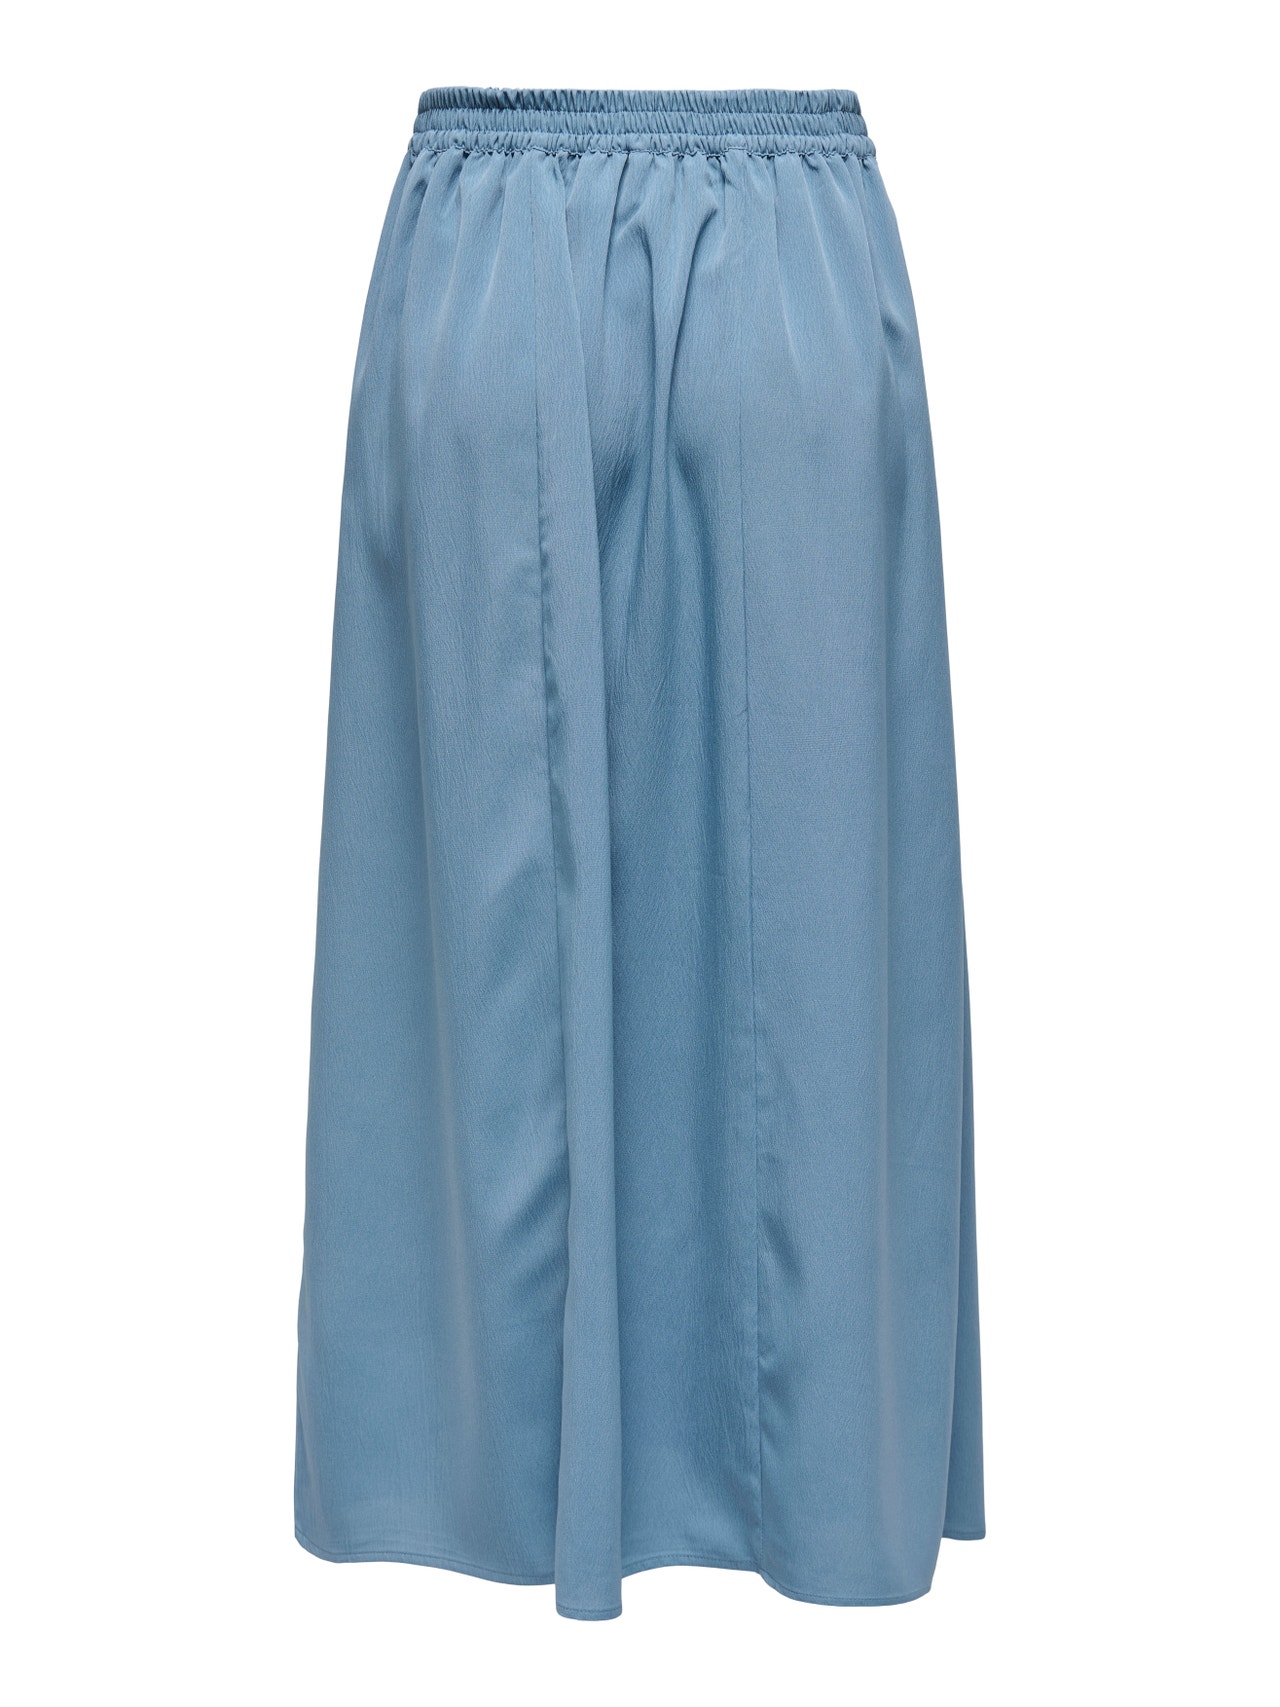 ONLY Maxi skirt with belt -Coronet Blue - 15335565